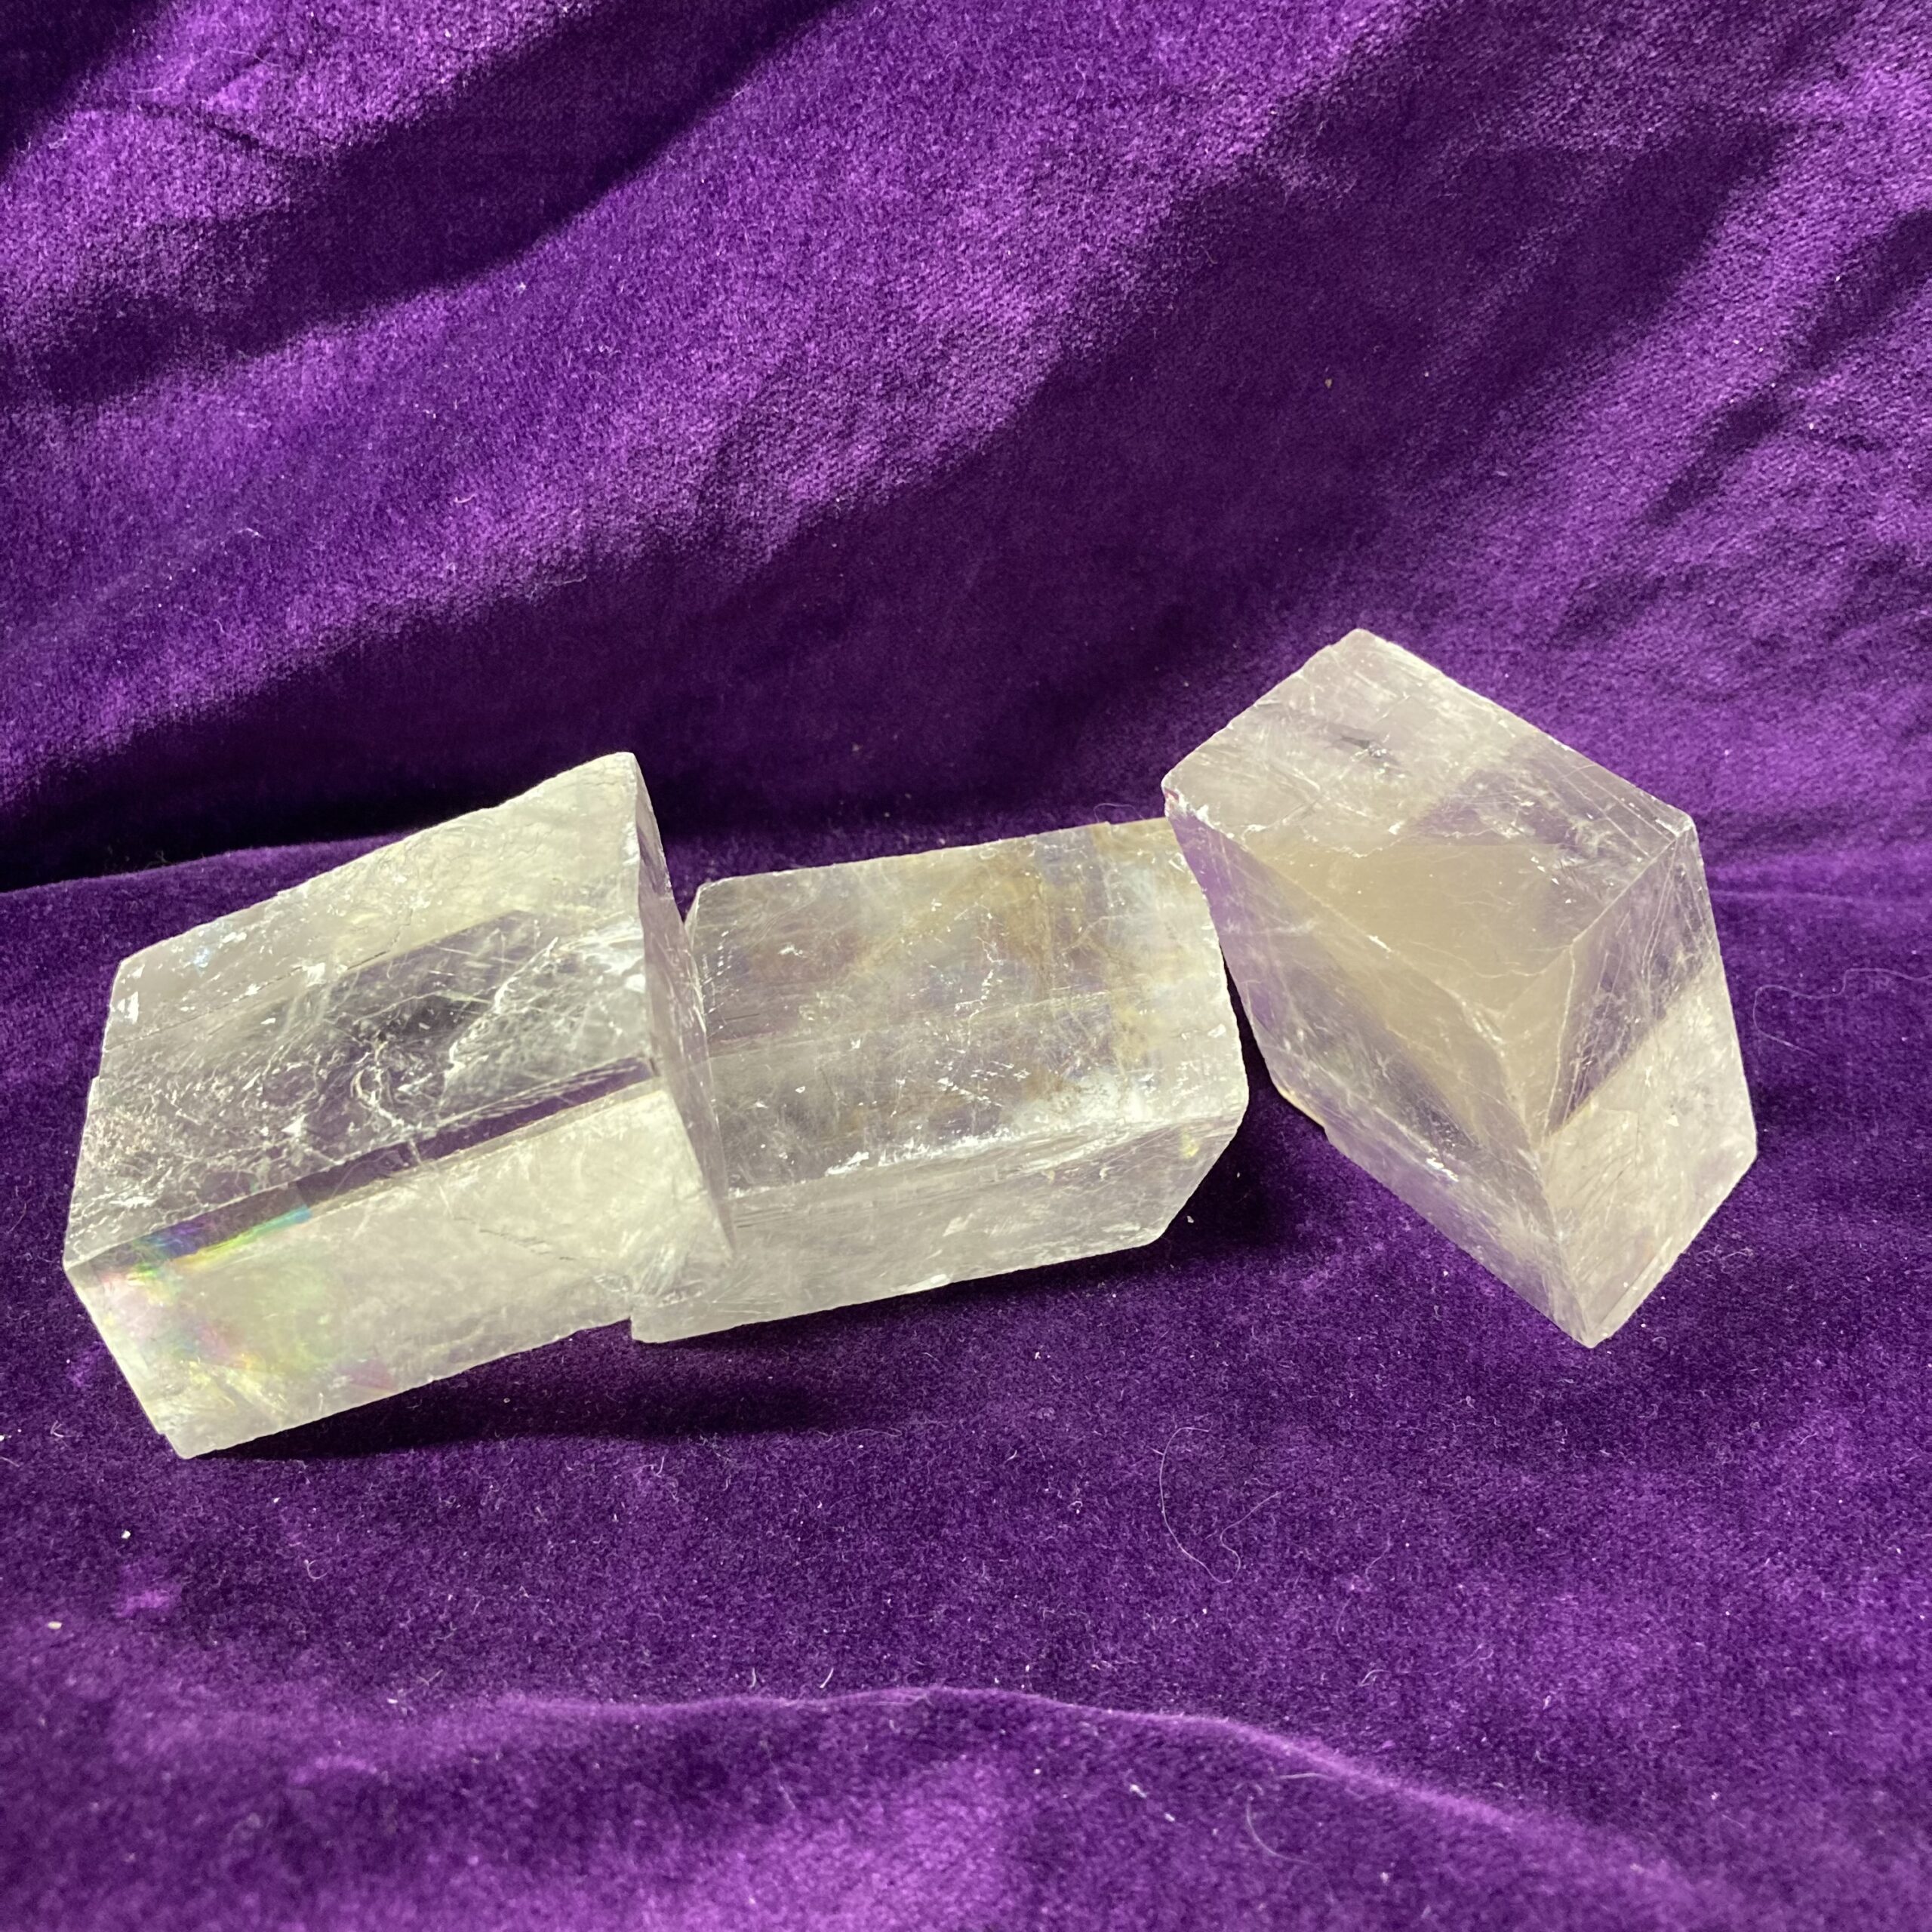 BCQLI 1.96 inches Night-luminescent Pearl-Fluorite-Iceland Spar,Crystal Ball Fine commodities 